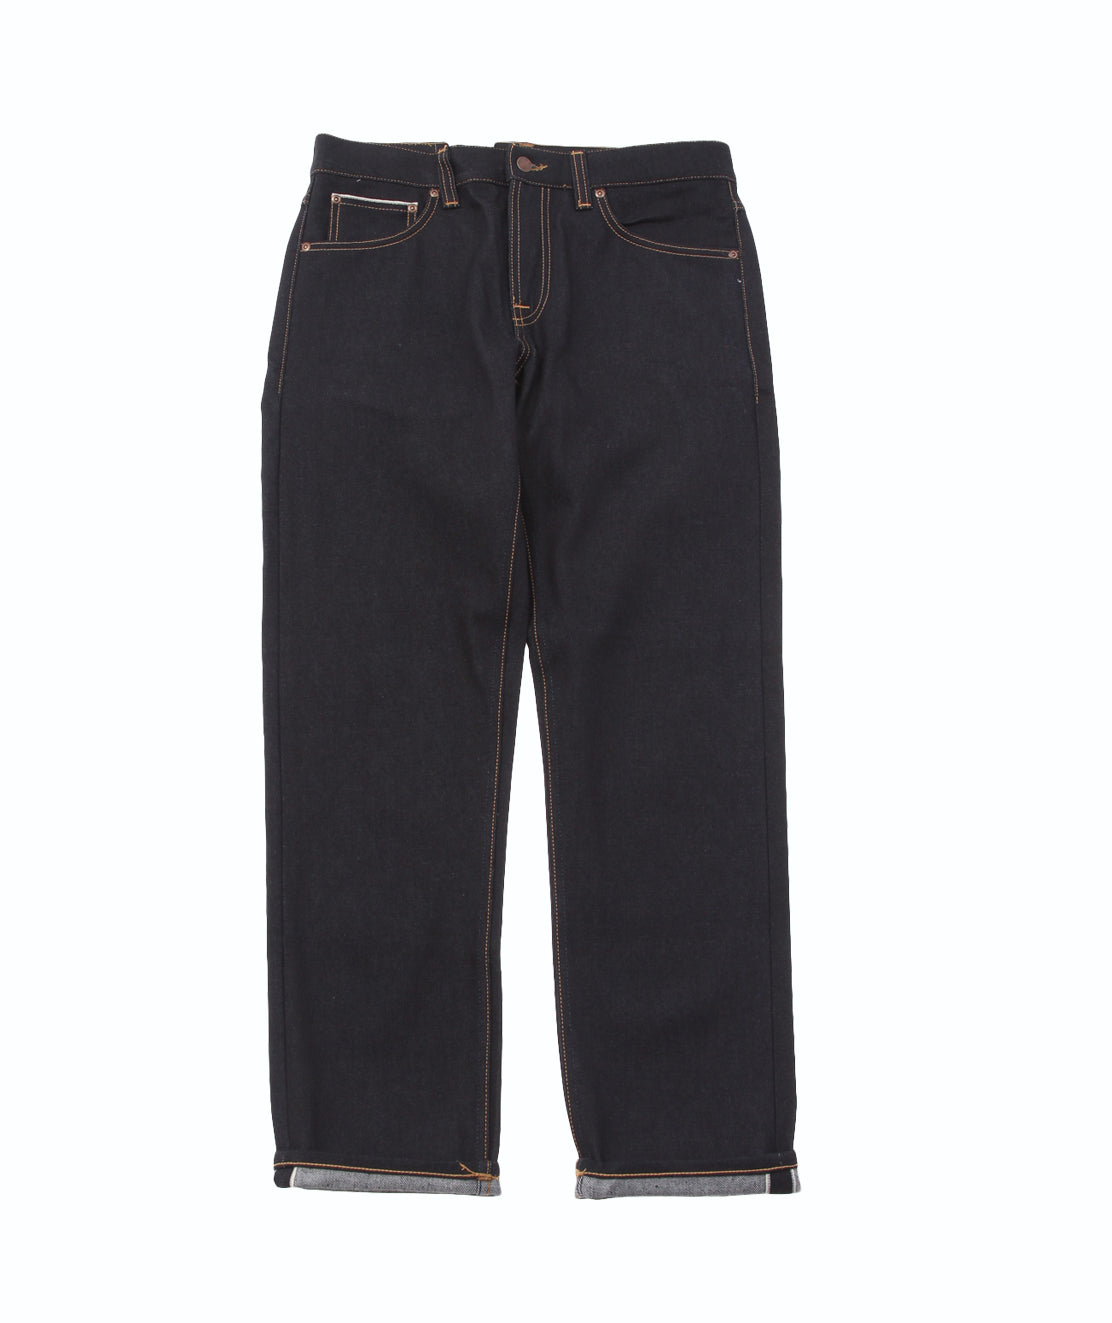 Nudie Jeans: Gritty Jackson Dry Maze Selvage | Copperfield